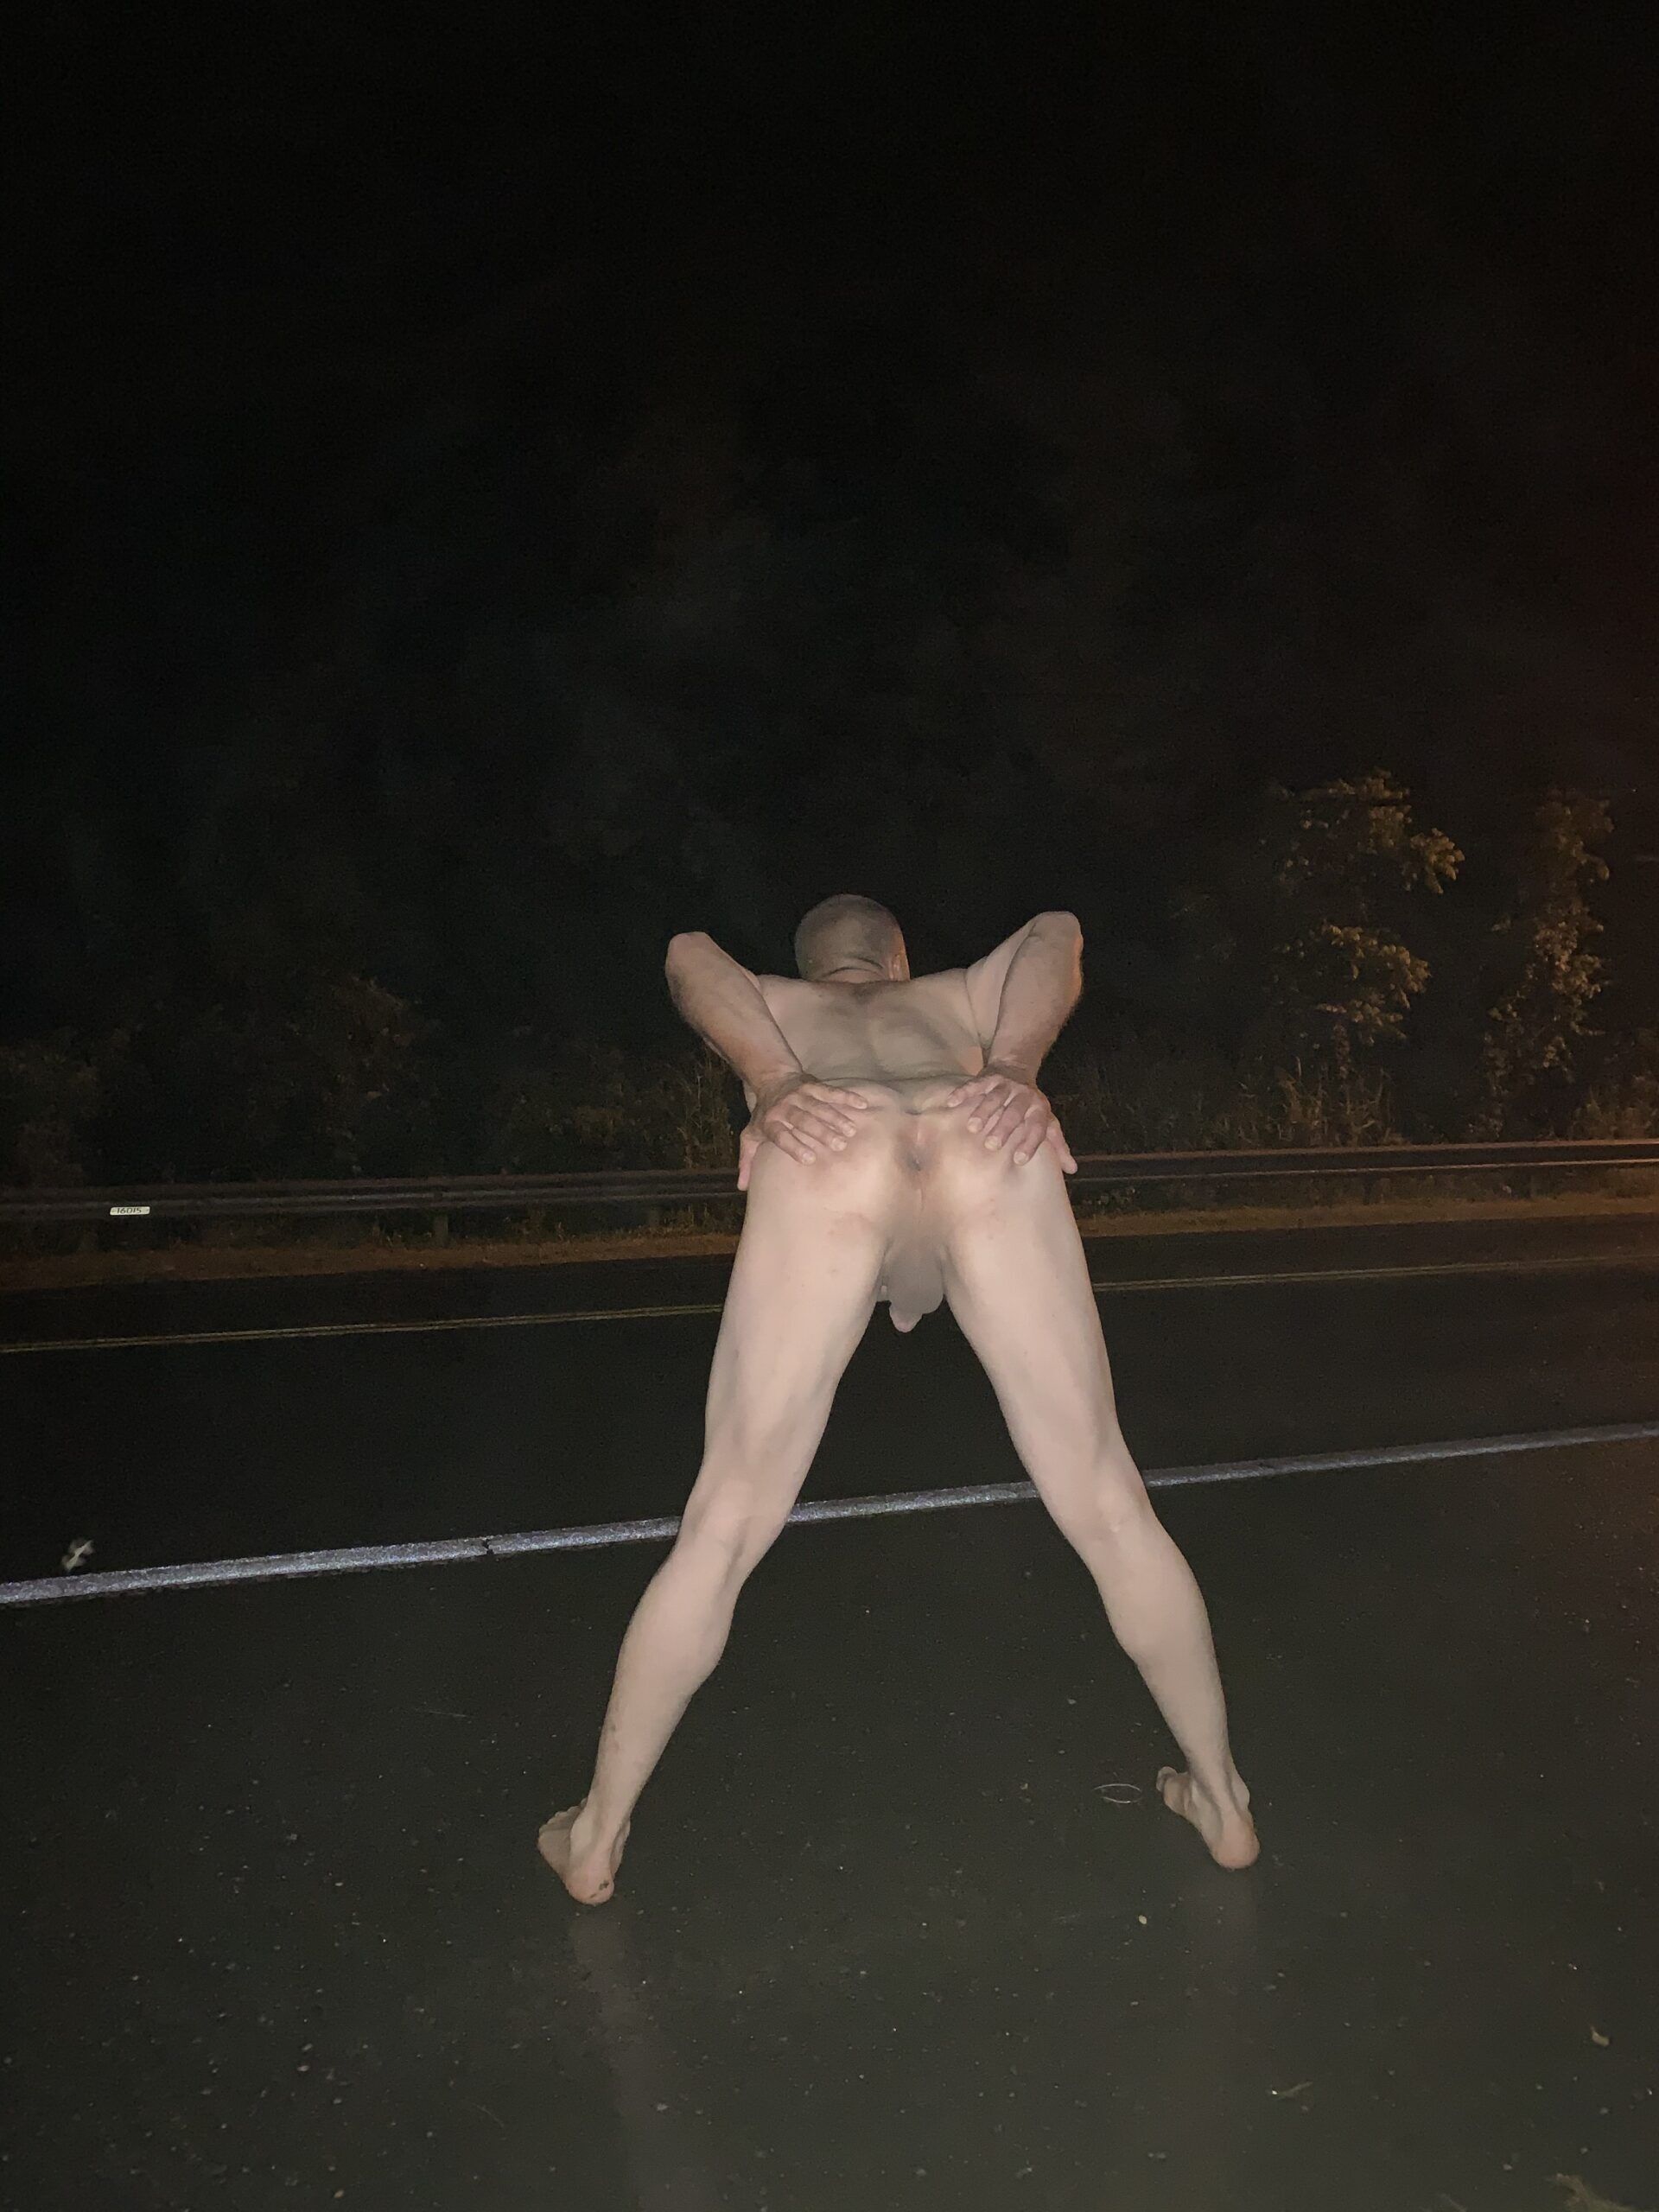 Real Amateurs Public Nudity Pics Ass Flash Pics  : Love getting naked in public 42/m showing ass in the street